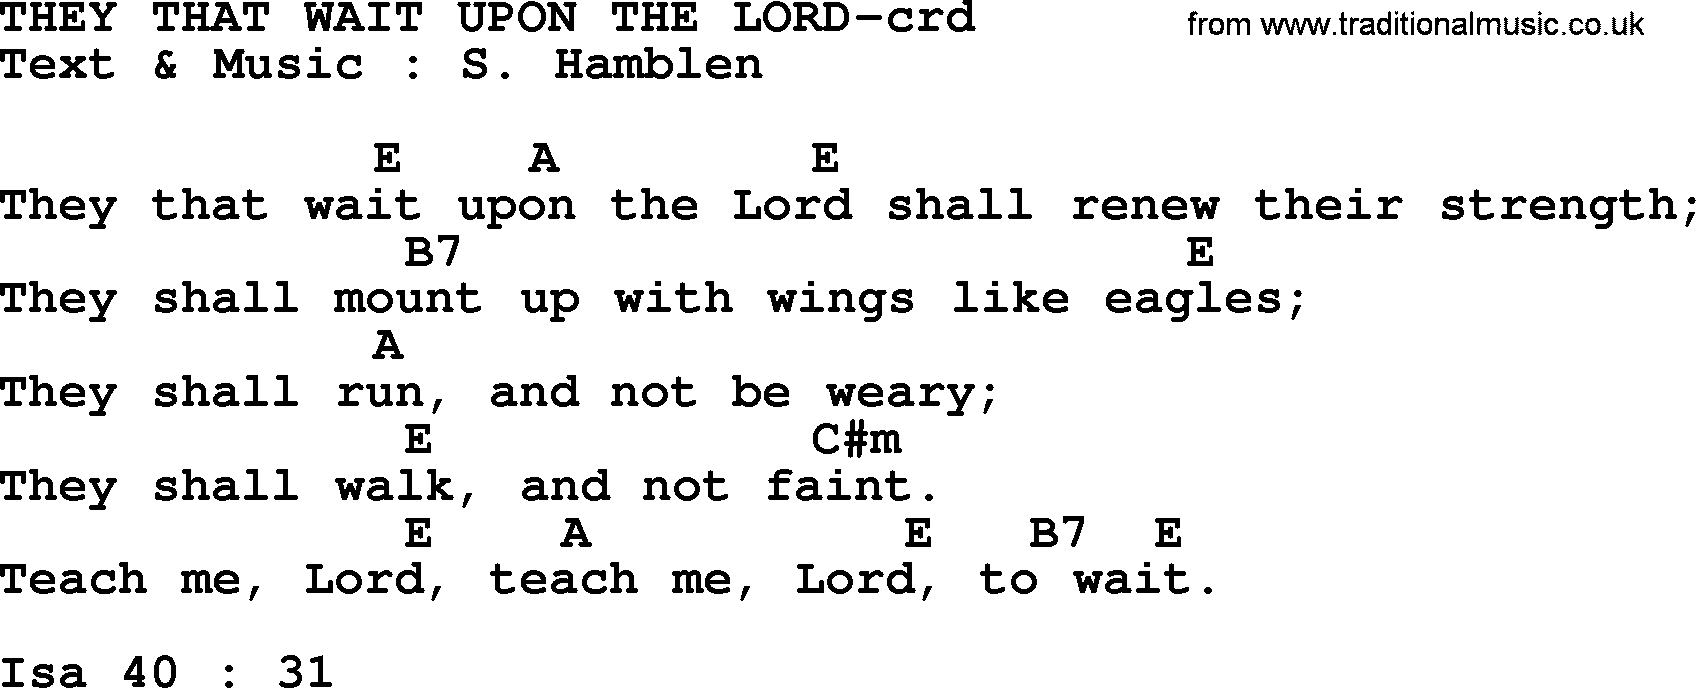 Top 500 Hymn: They That Wait Upon The Lord, lyrics and chords